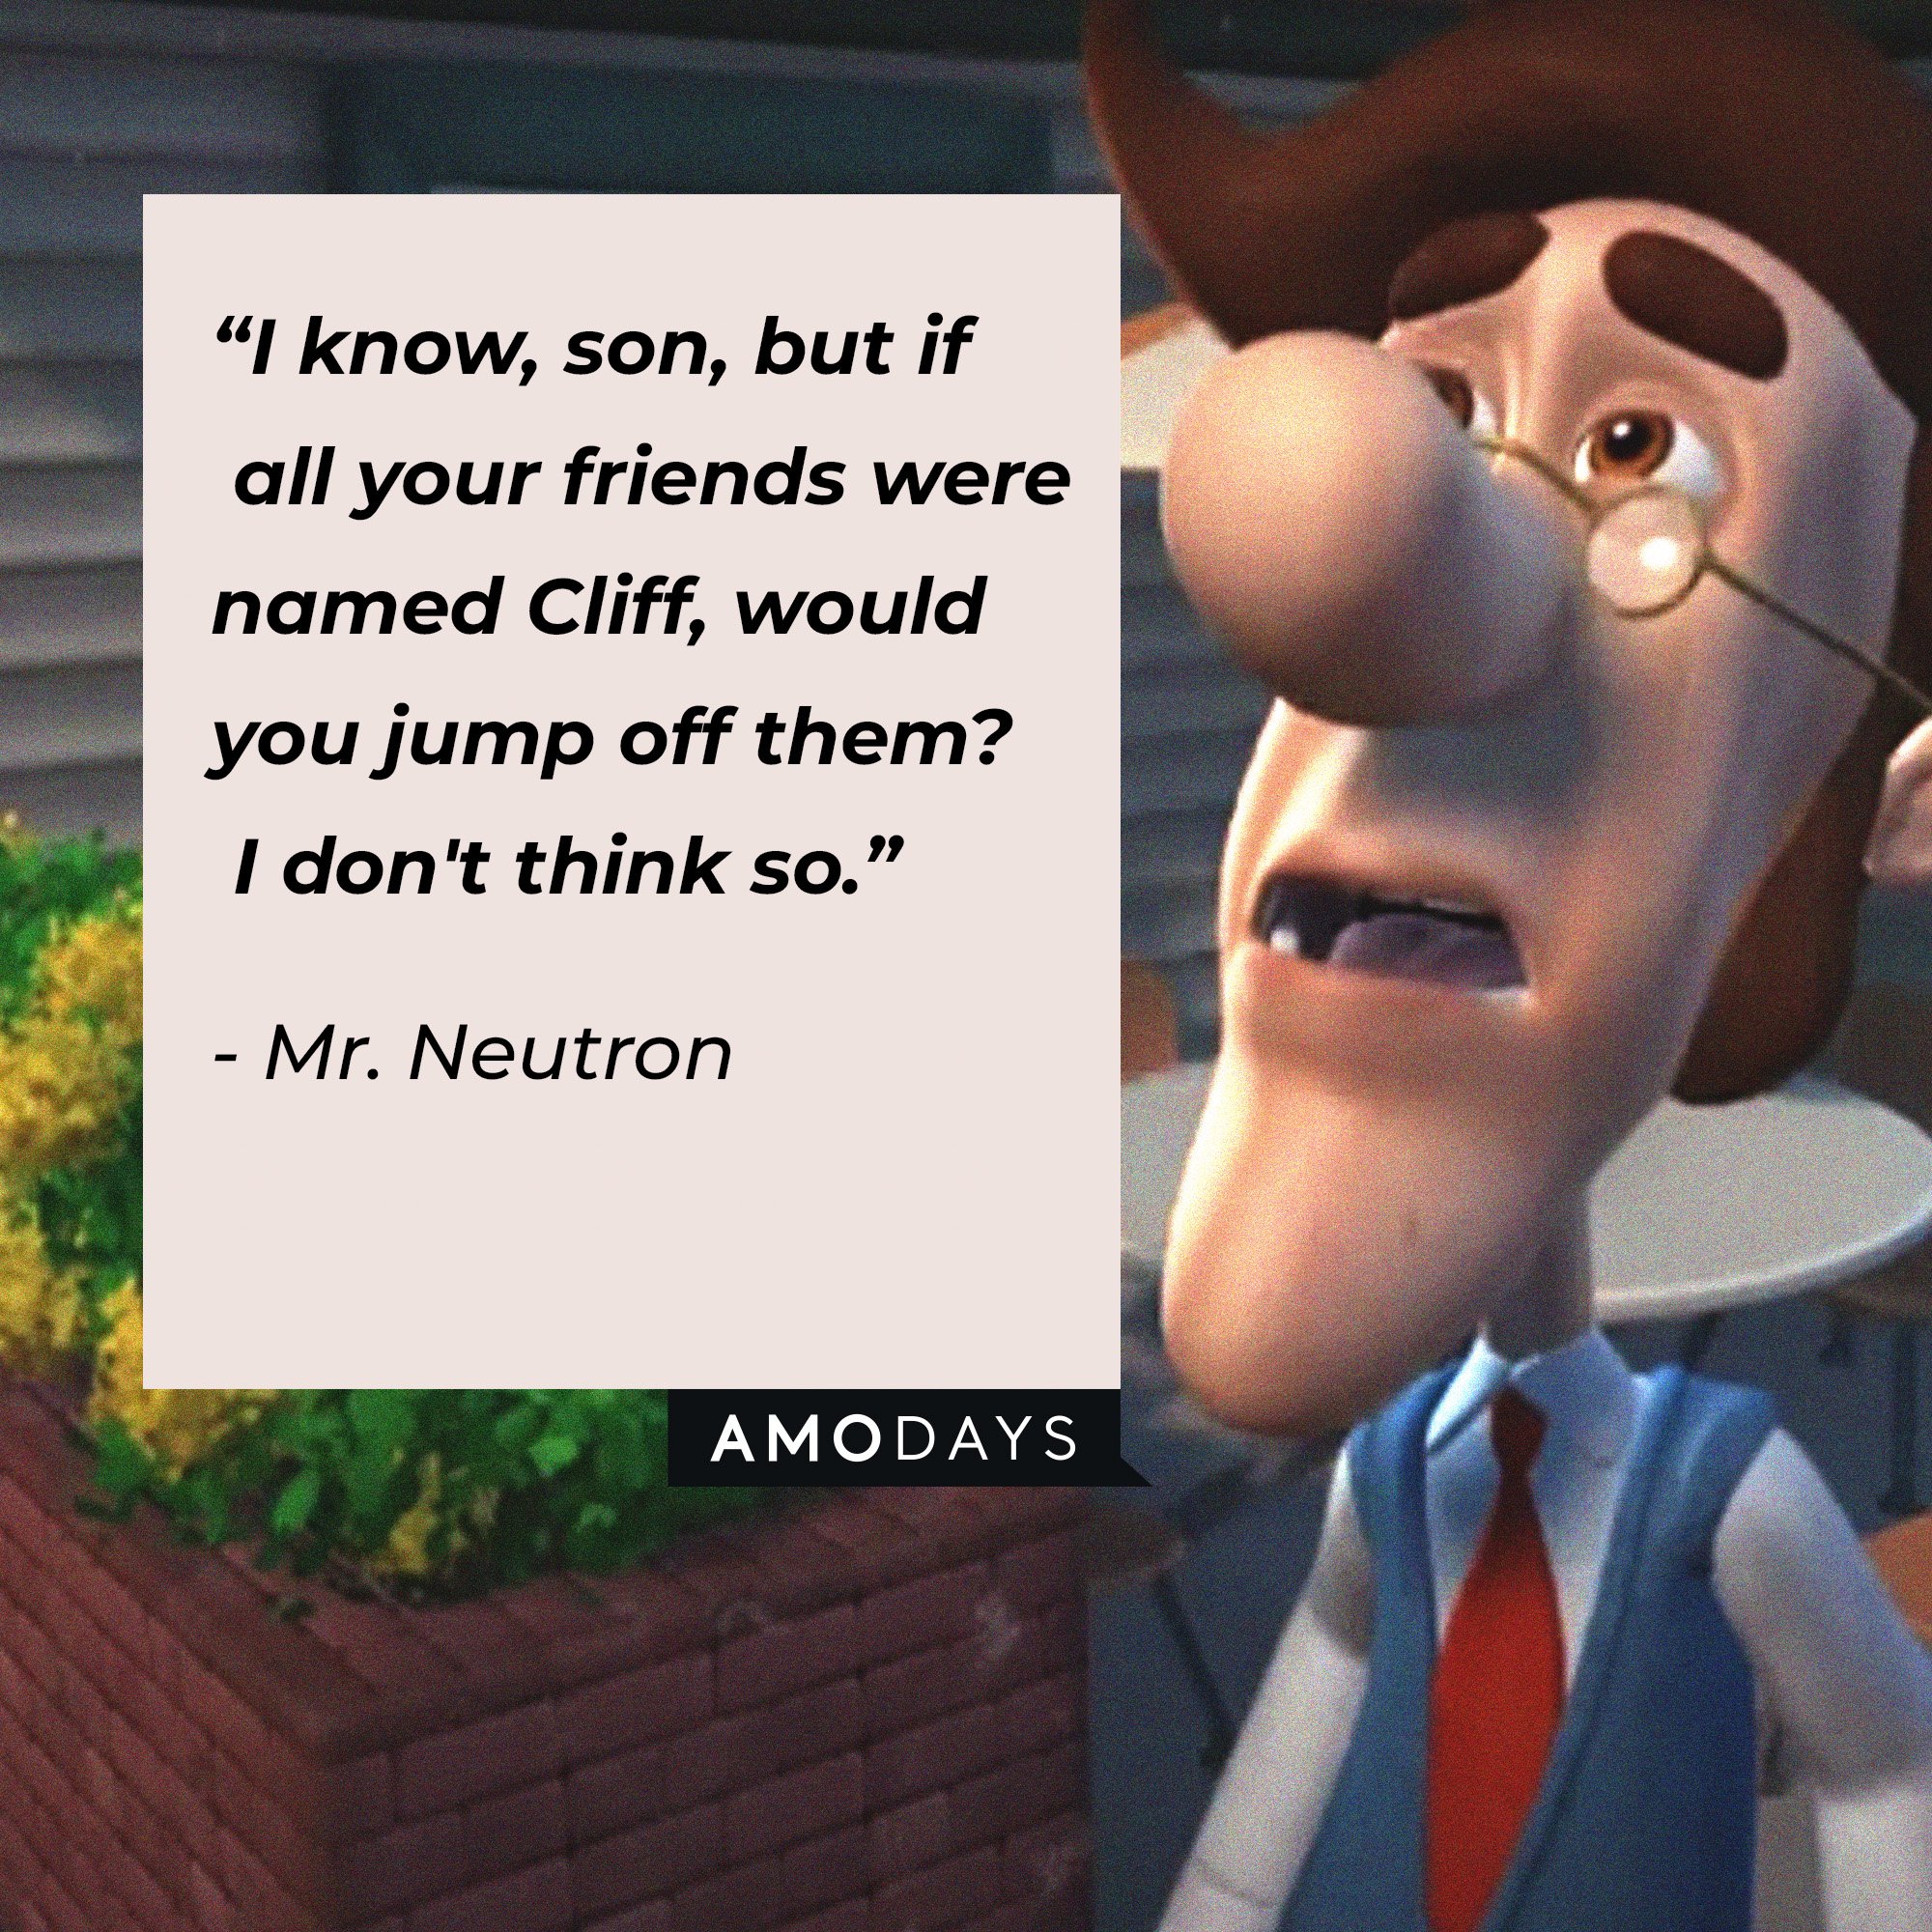 Mr. Neutron’s quote: “I know, son, but if all your friends were named Cliff, would you jump off them? I don't think so.” | Image: AmoDays